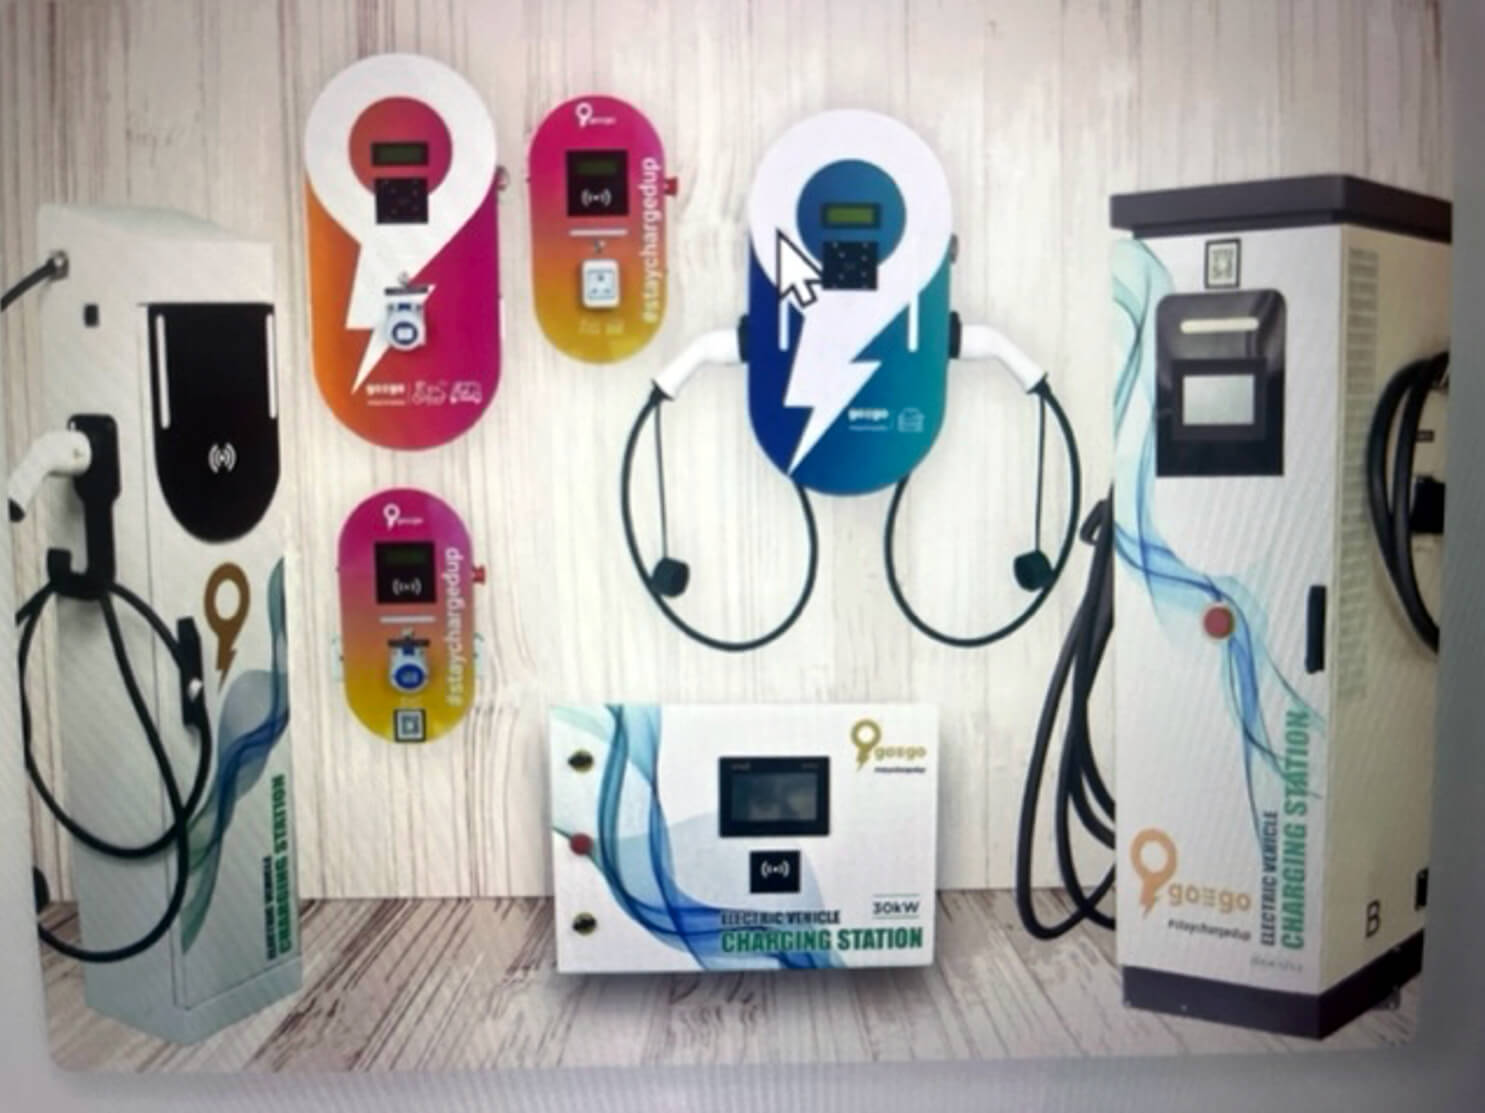 EV Charger Supply